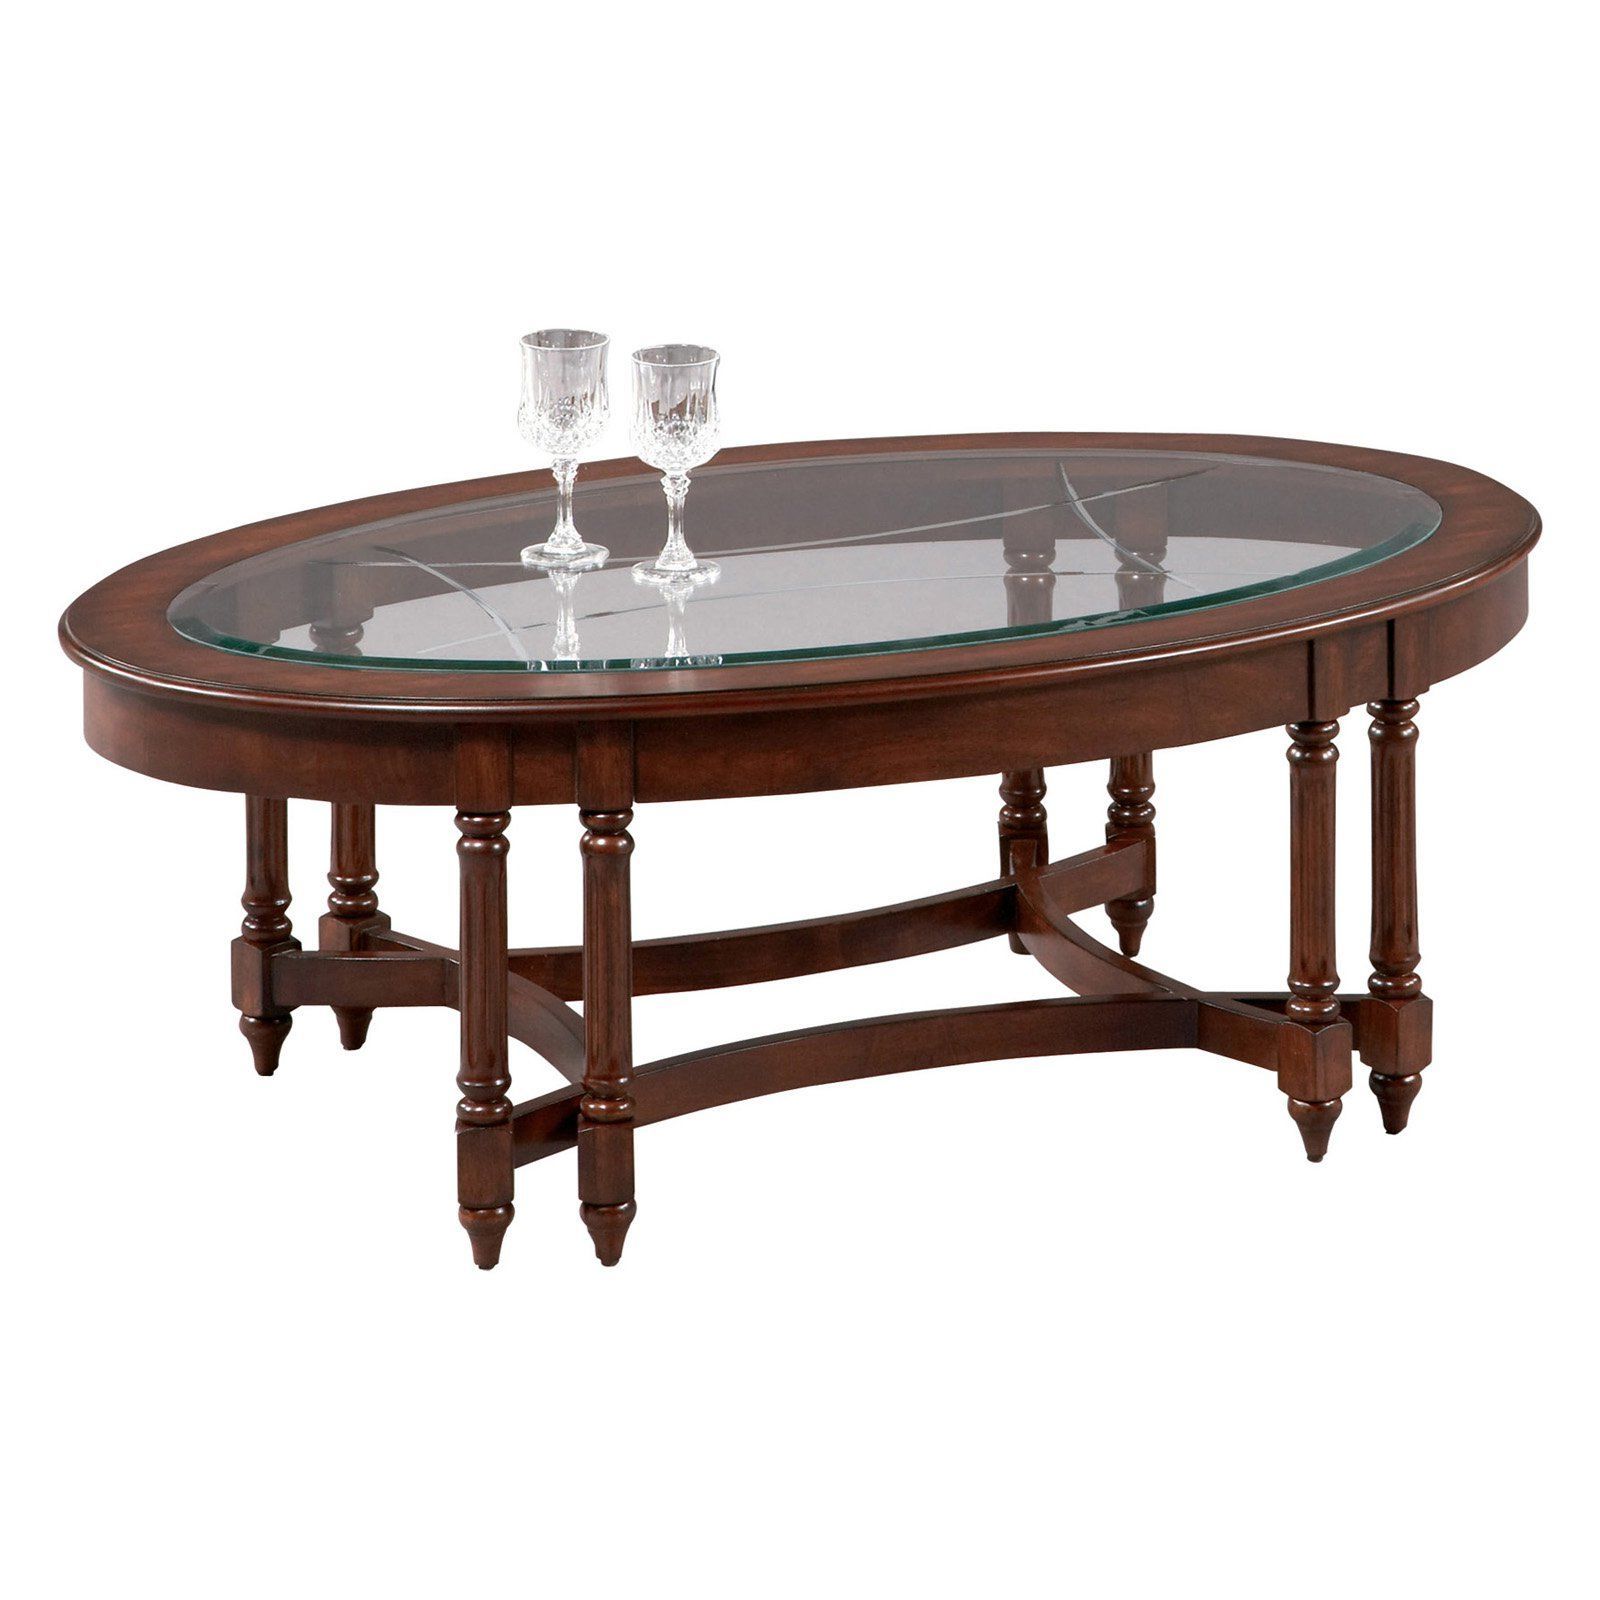 Progressive Furniture Oval Cocktail Table – Dark Berry | Progressive For Progressive Furniture Cocktail Tables (View 13 of 20)